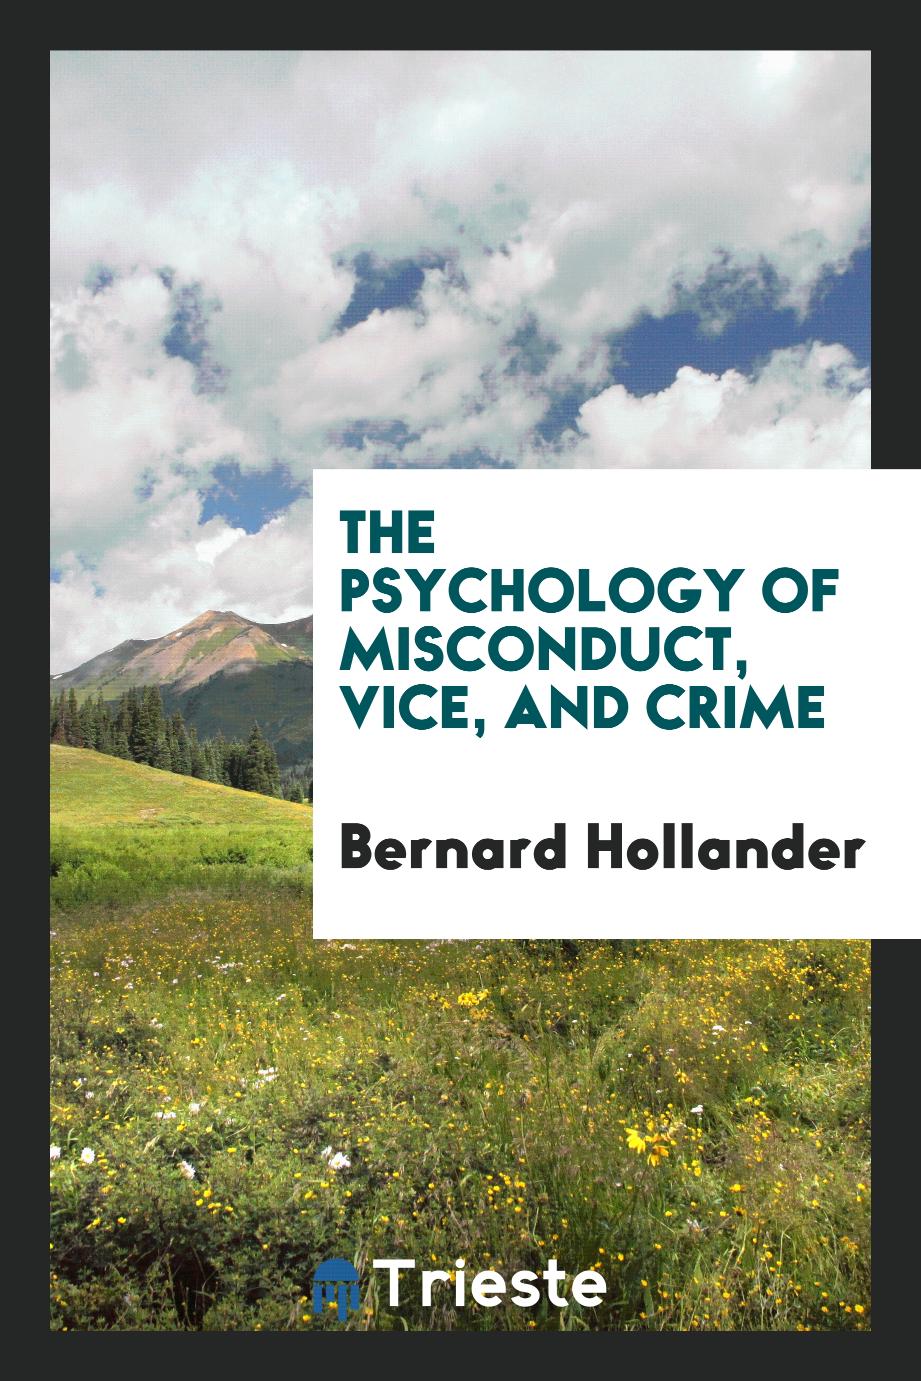 The psychology of misconduct, vice, and crime